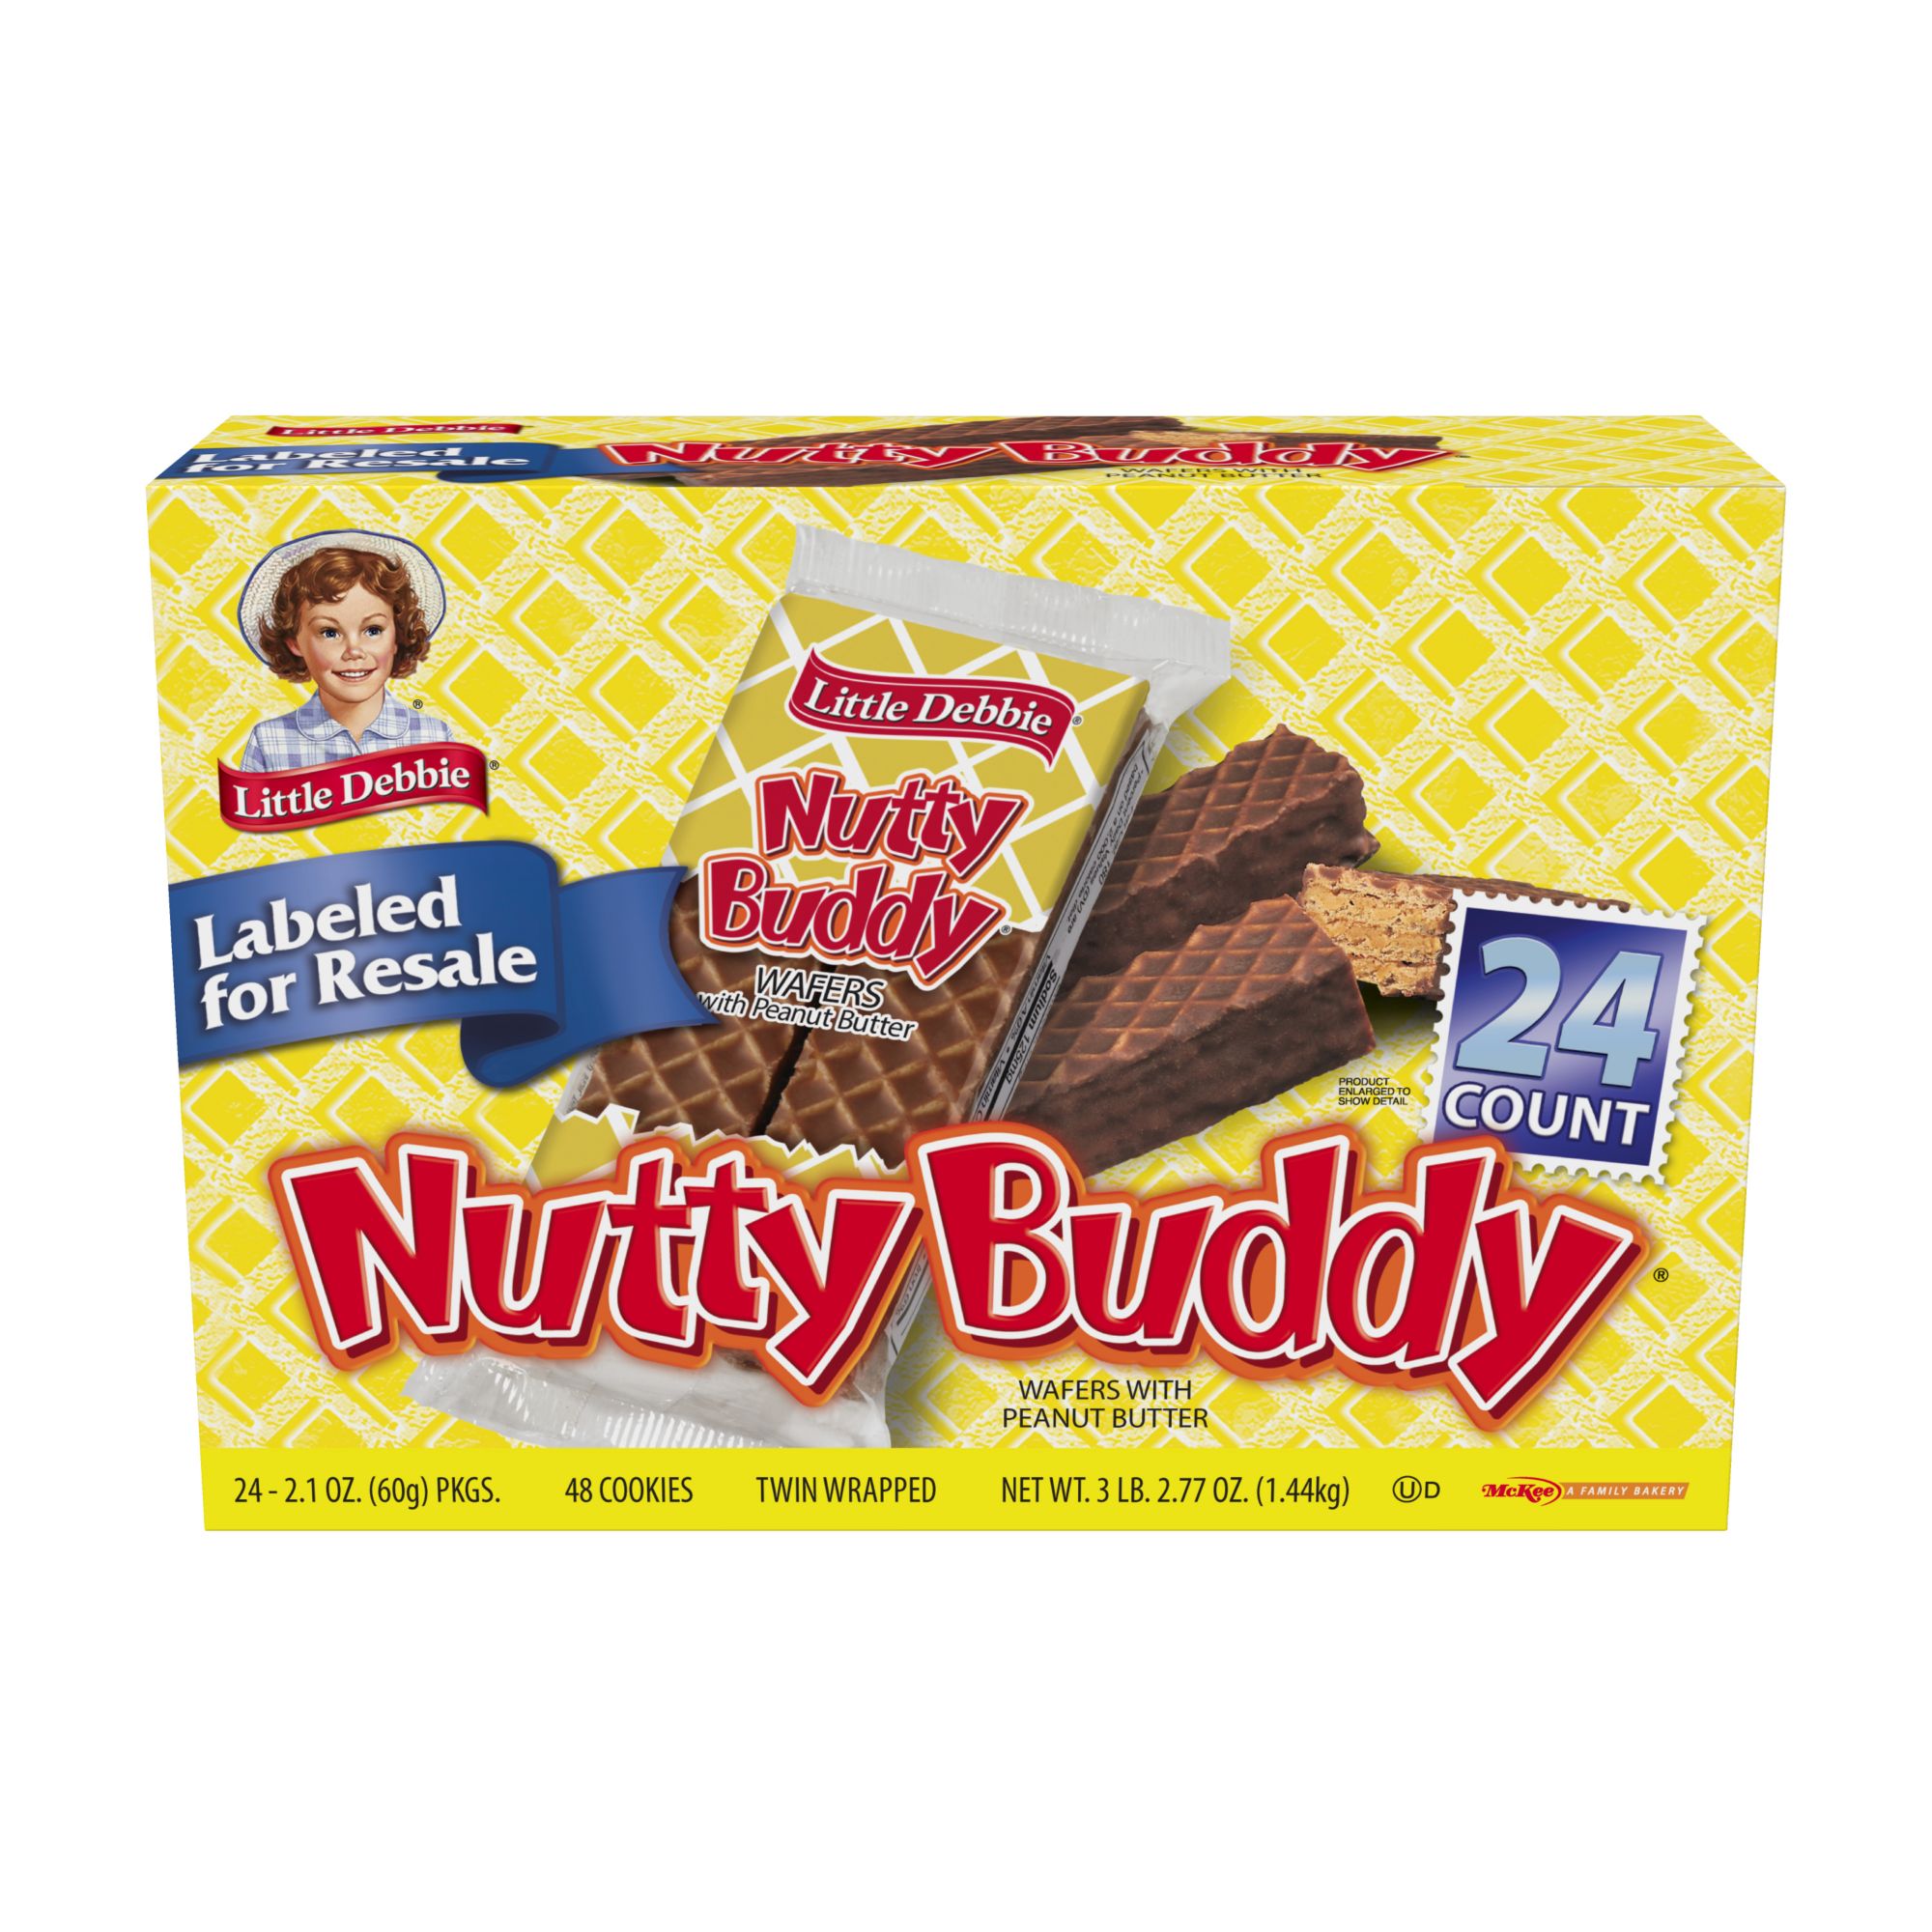 Little Debbie Twin Wrapped Nutty Buddy Wafers with Peanut Butter, 24 ct.